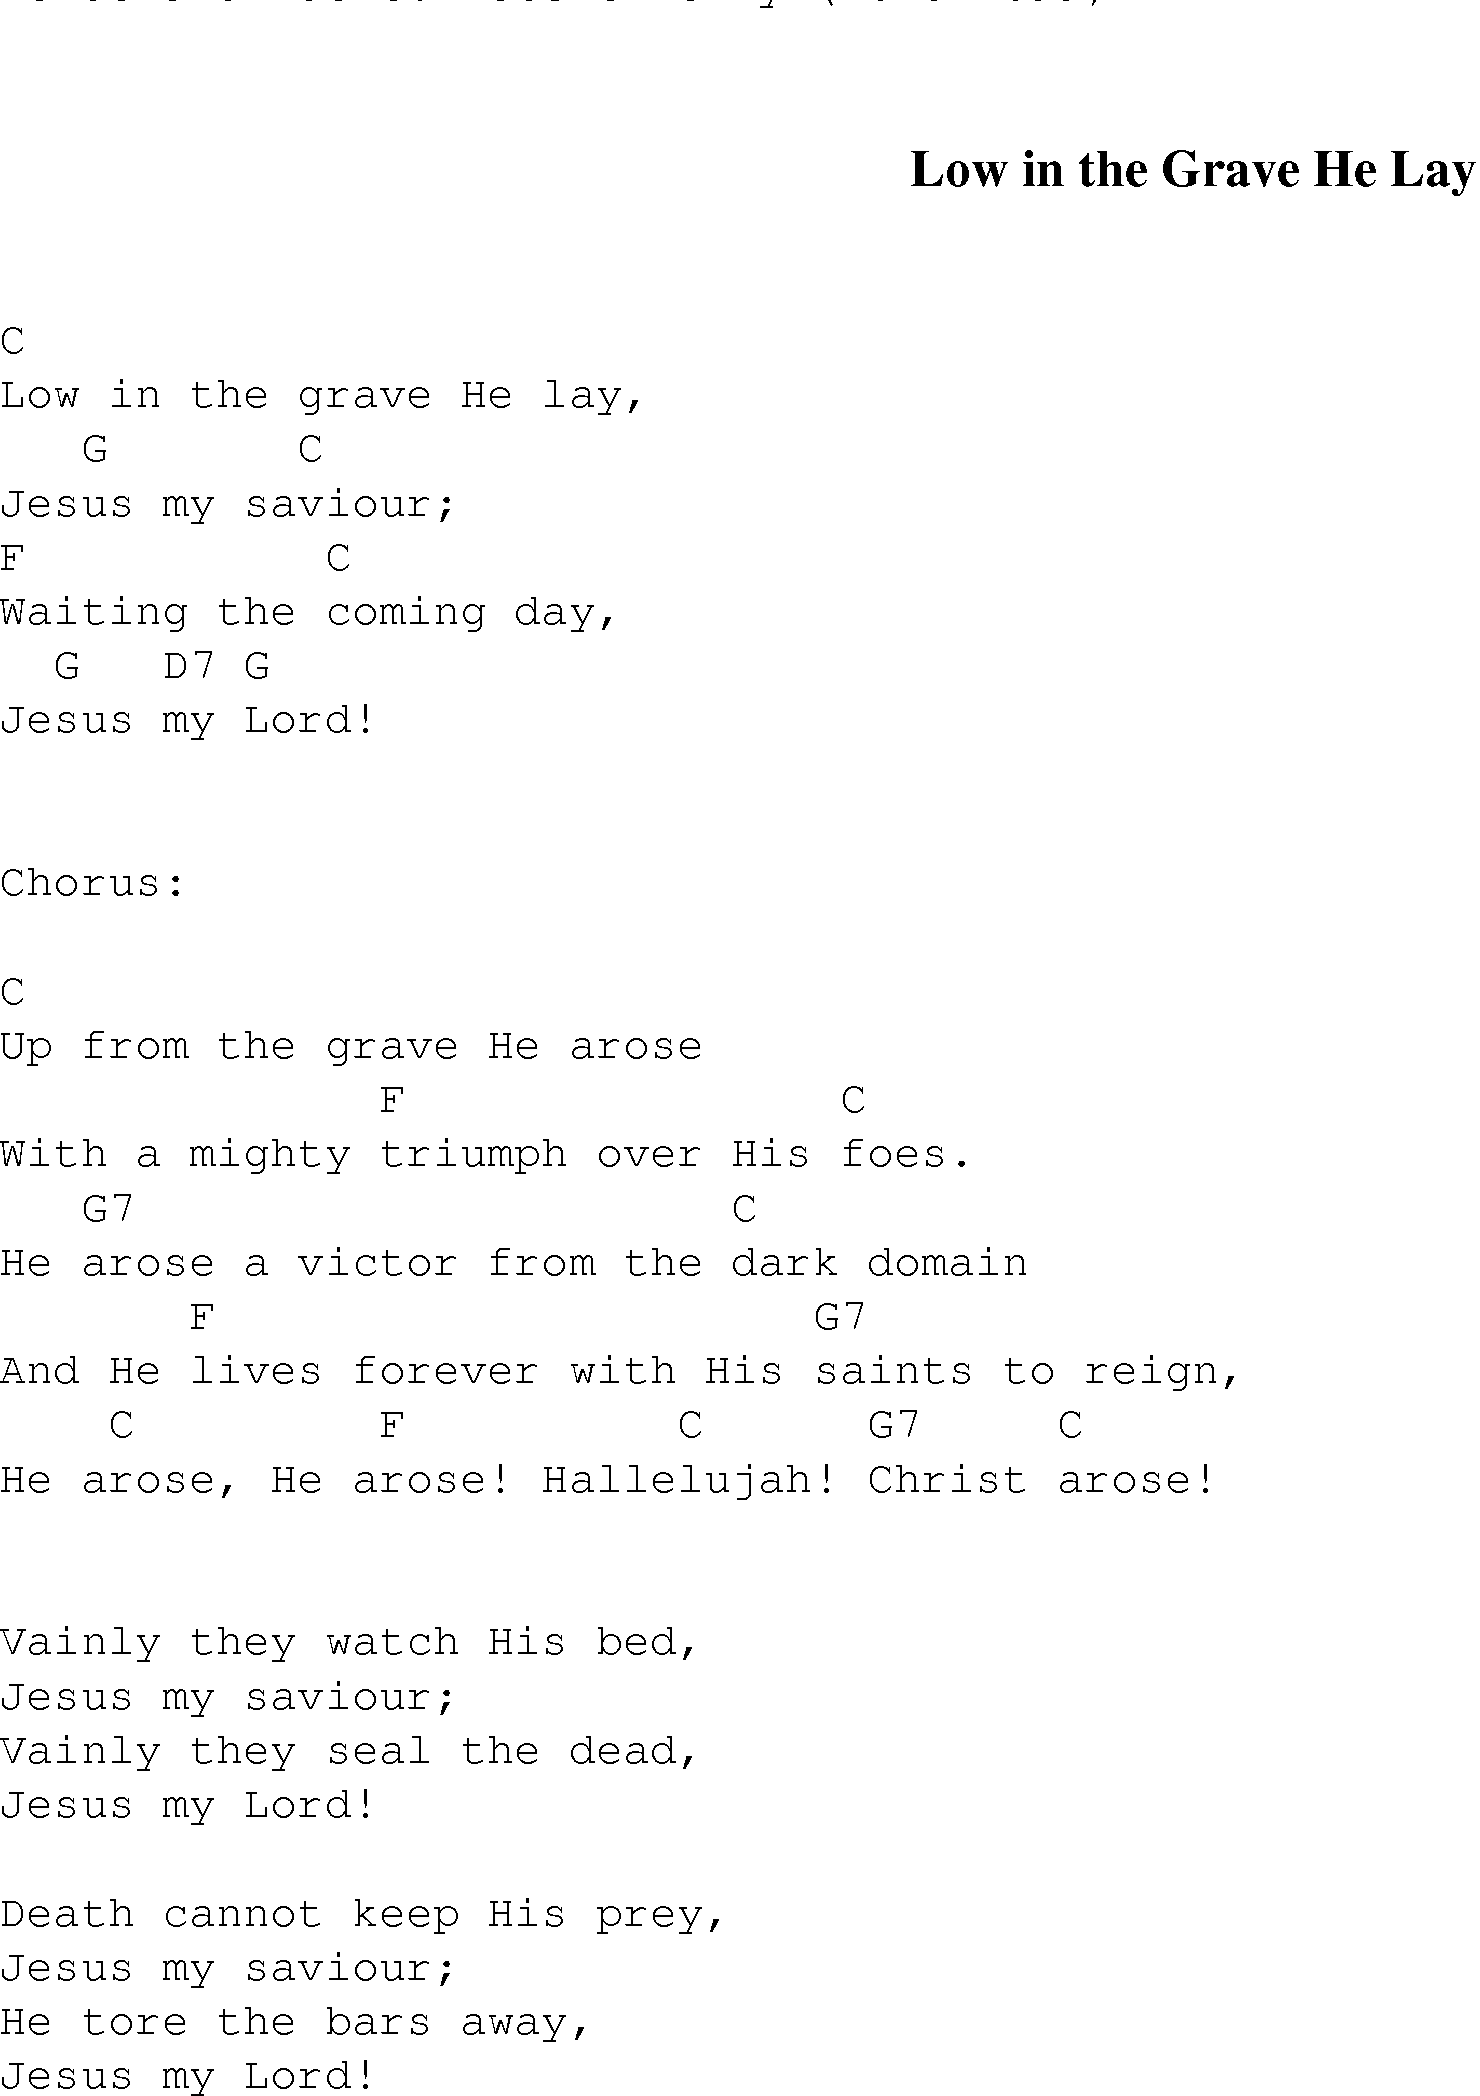 Gospel Song: low_in_the_grave, lyrics and chords.